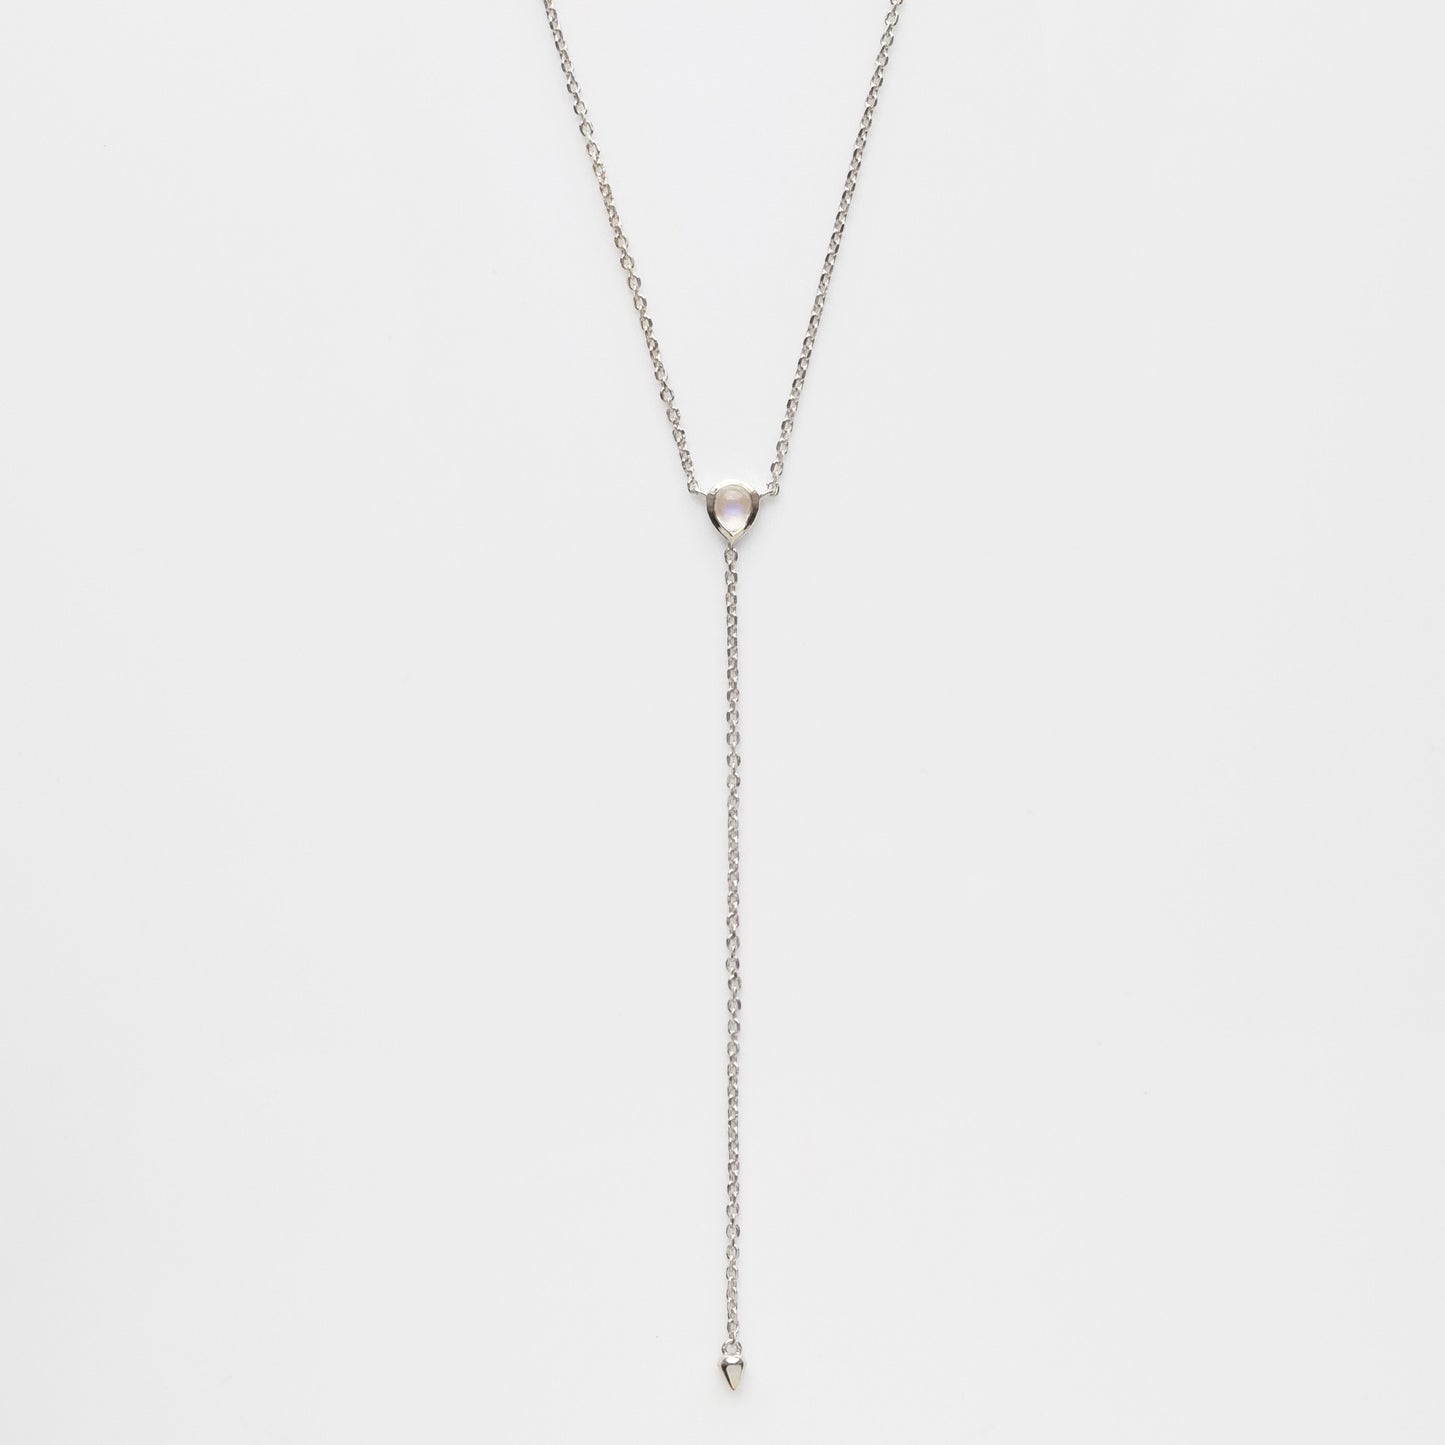 Lariat necklace with moonstone in silver